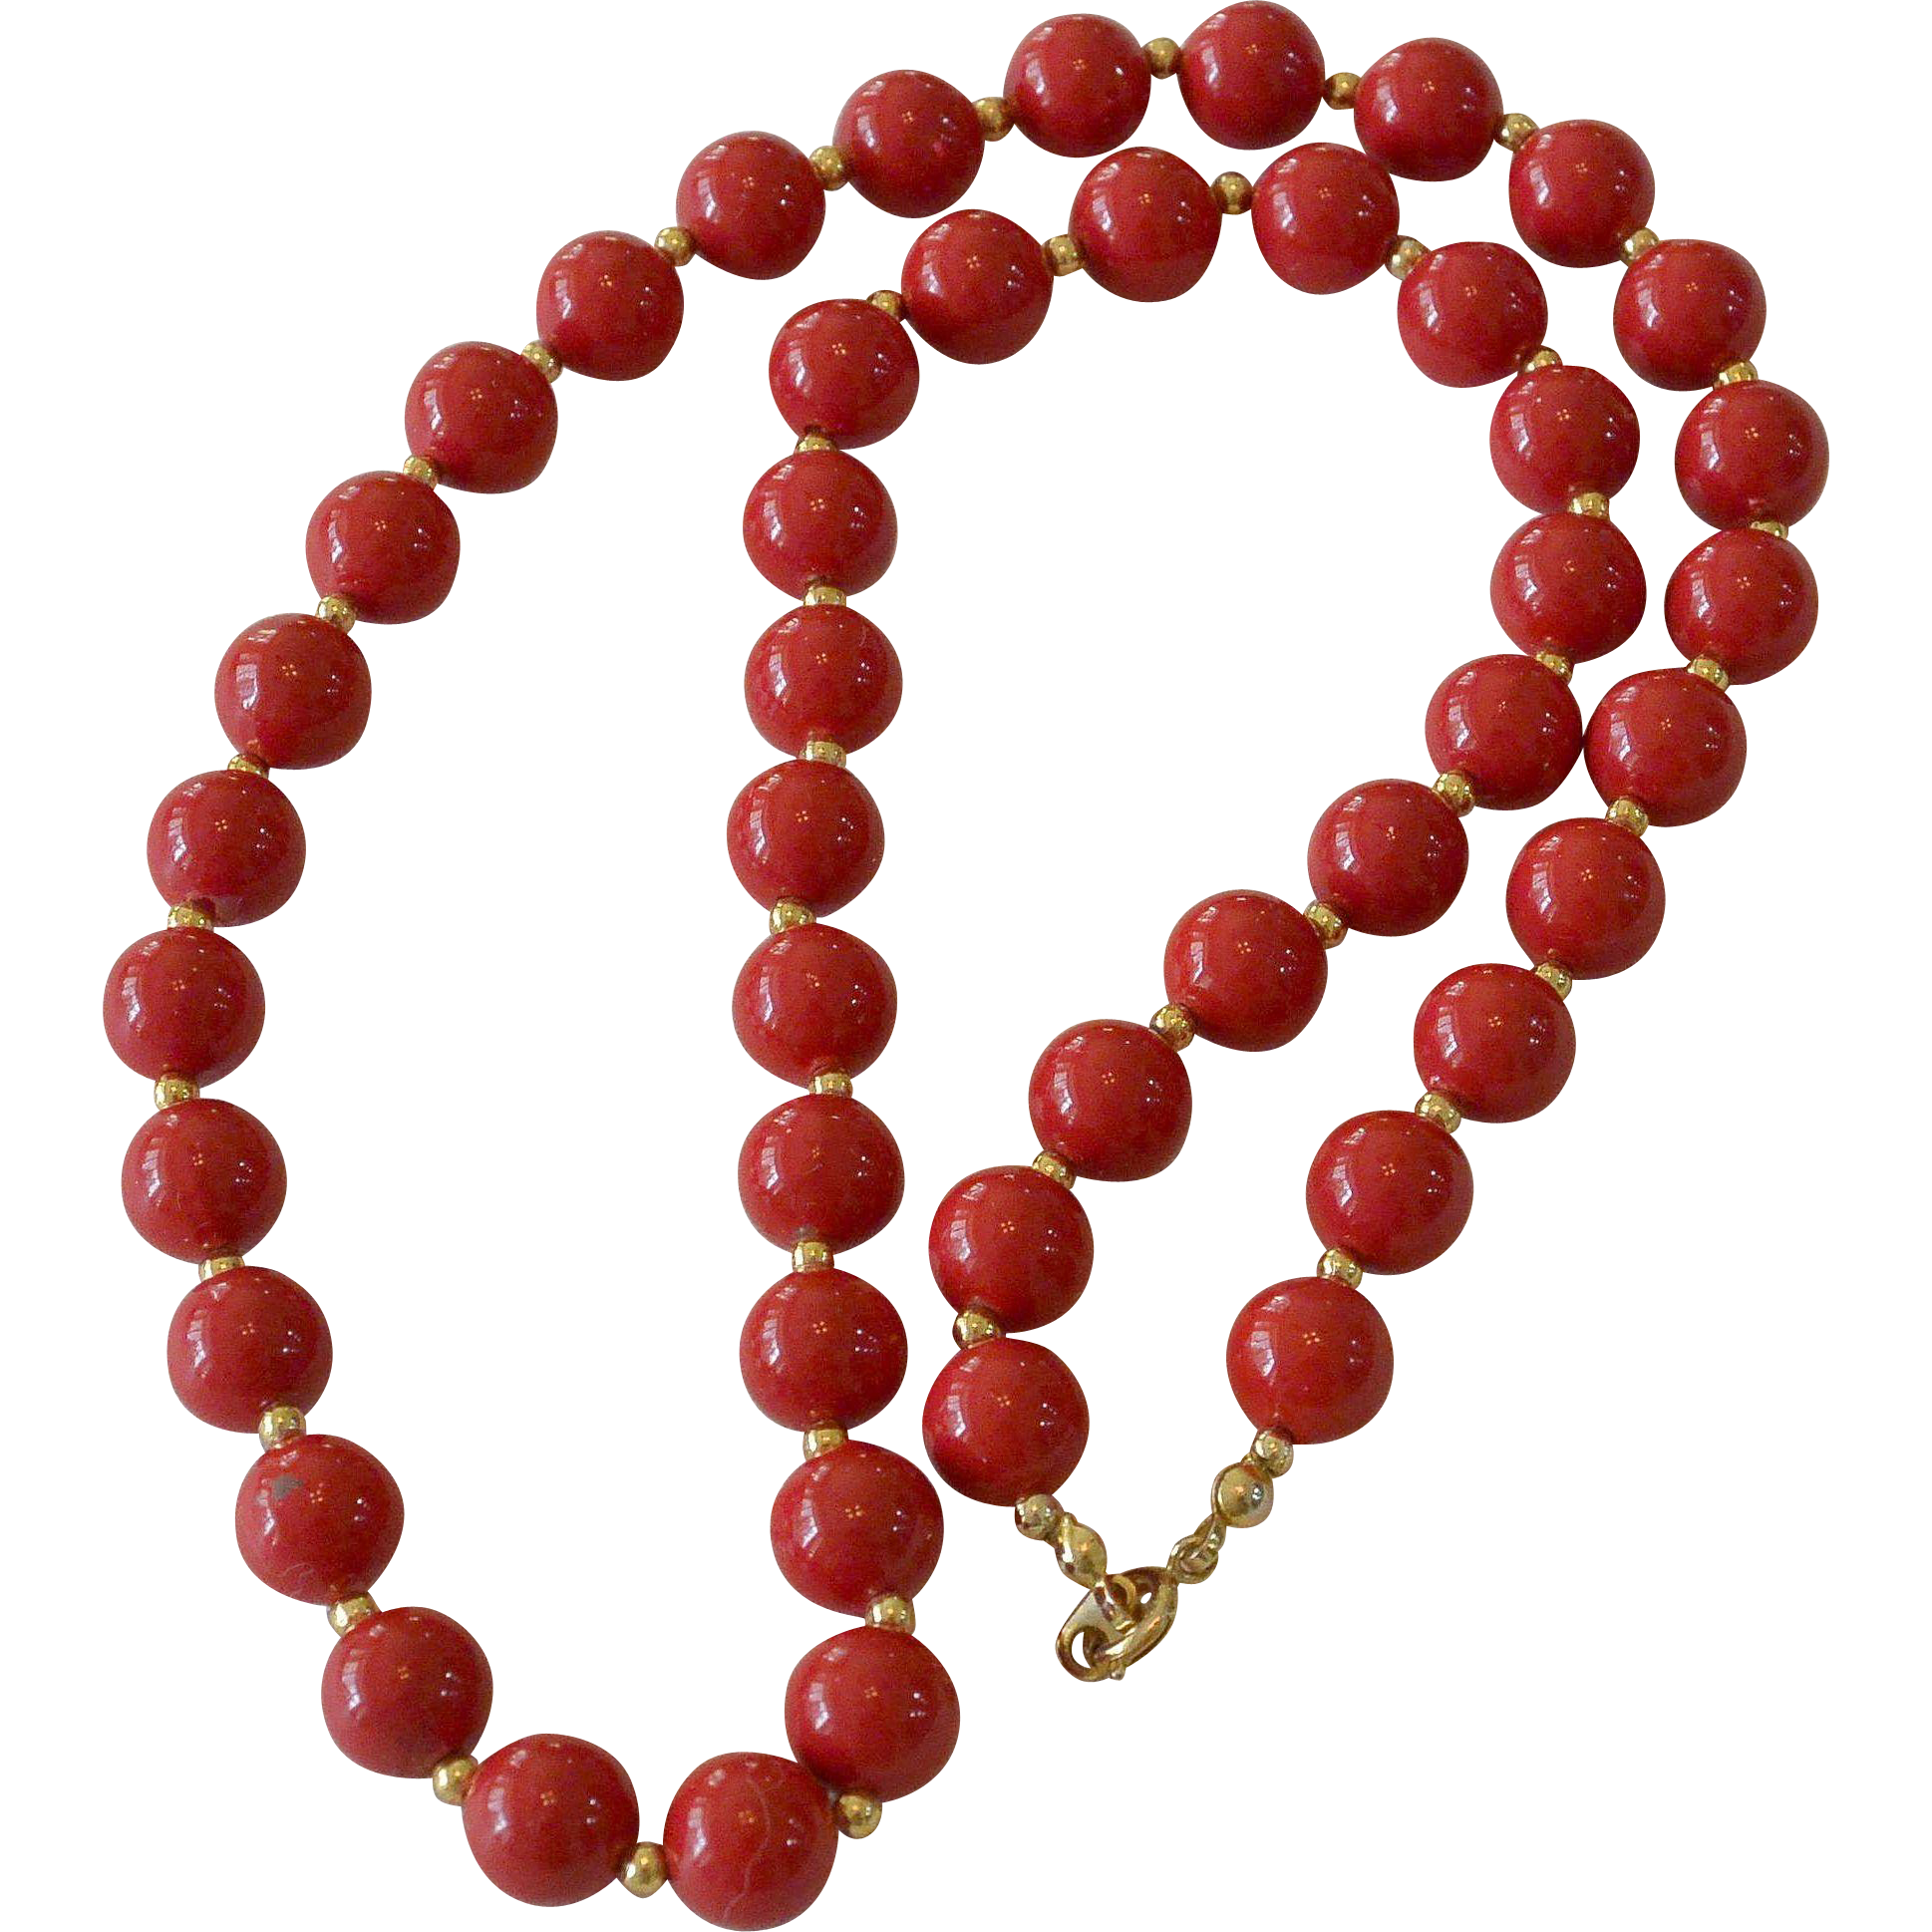 24.0 Inch Red Beads Necklace SOLD | Ruby Lane